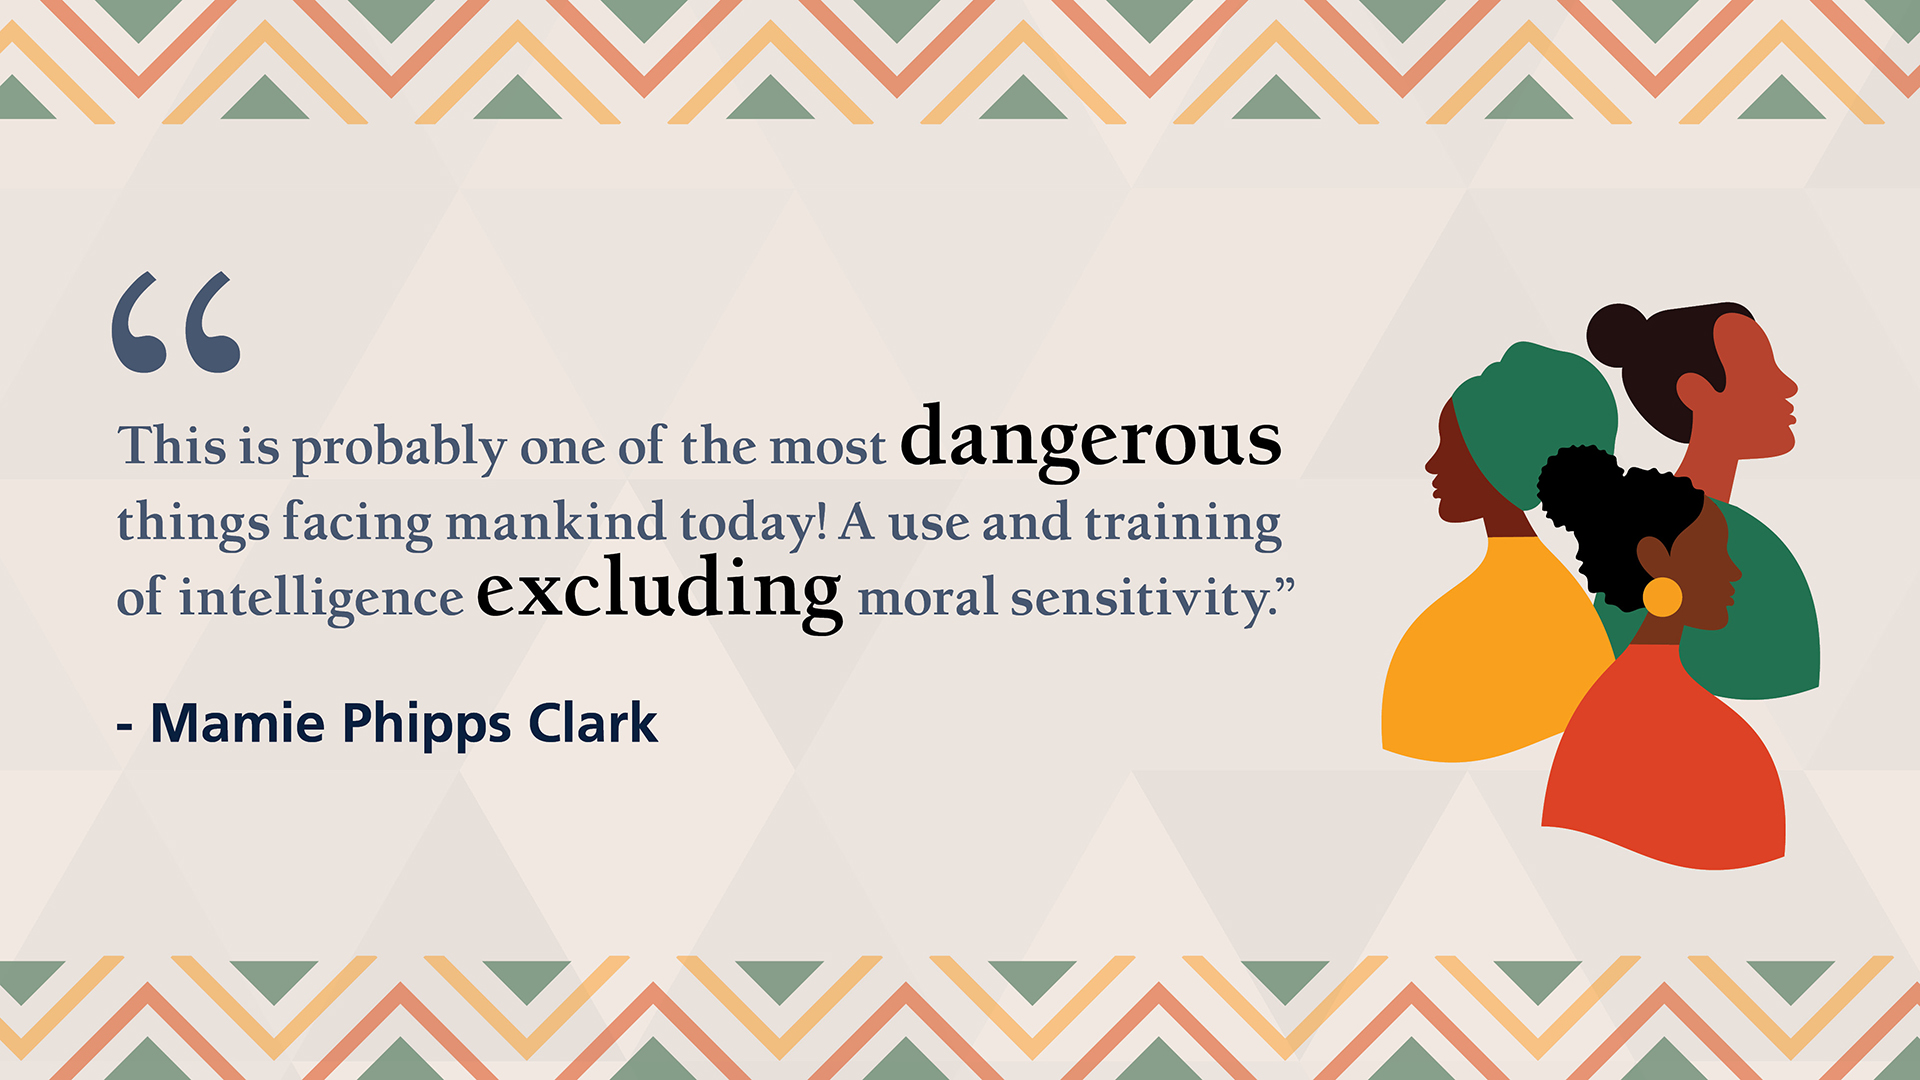 “This is probably one of the most dangerous things facing mankind today! A use and training of intelligence excluding moral sensitivity.” -Mamie Phipps Clark